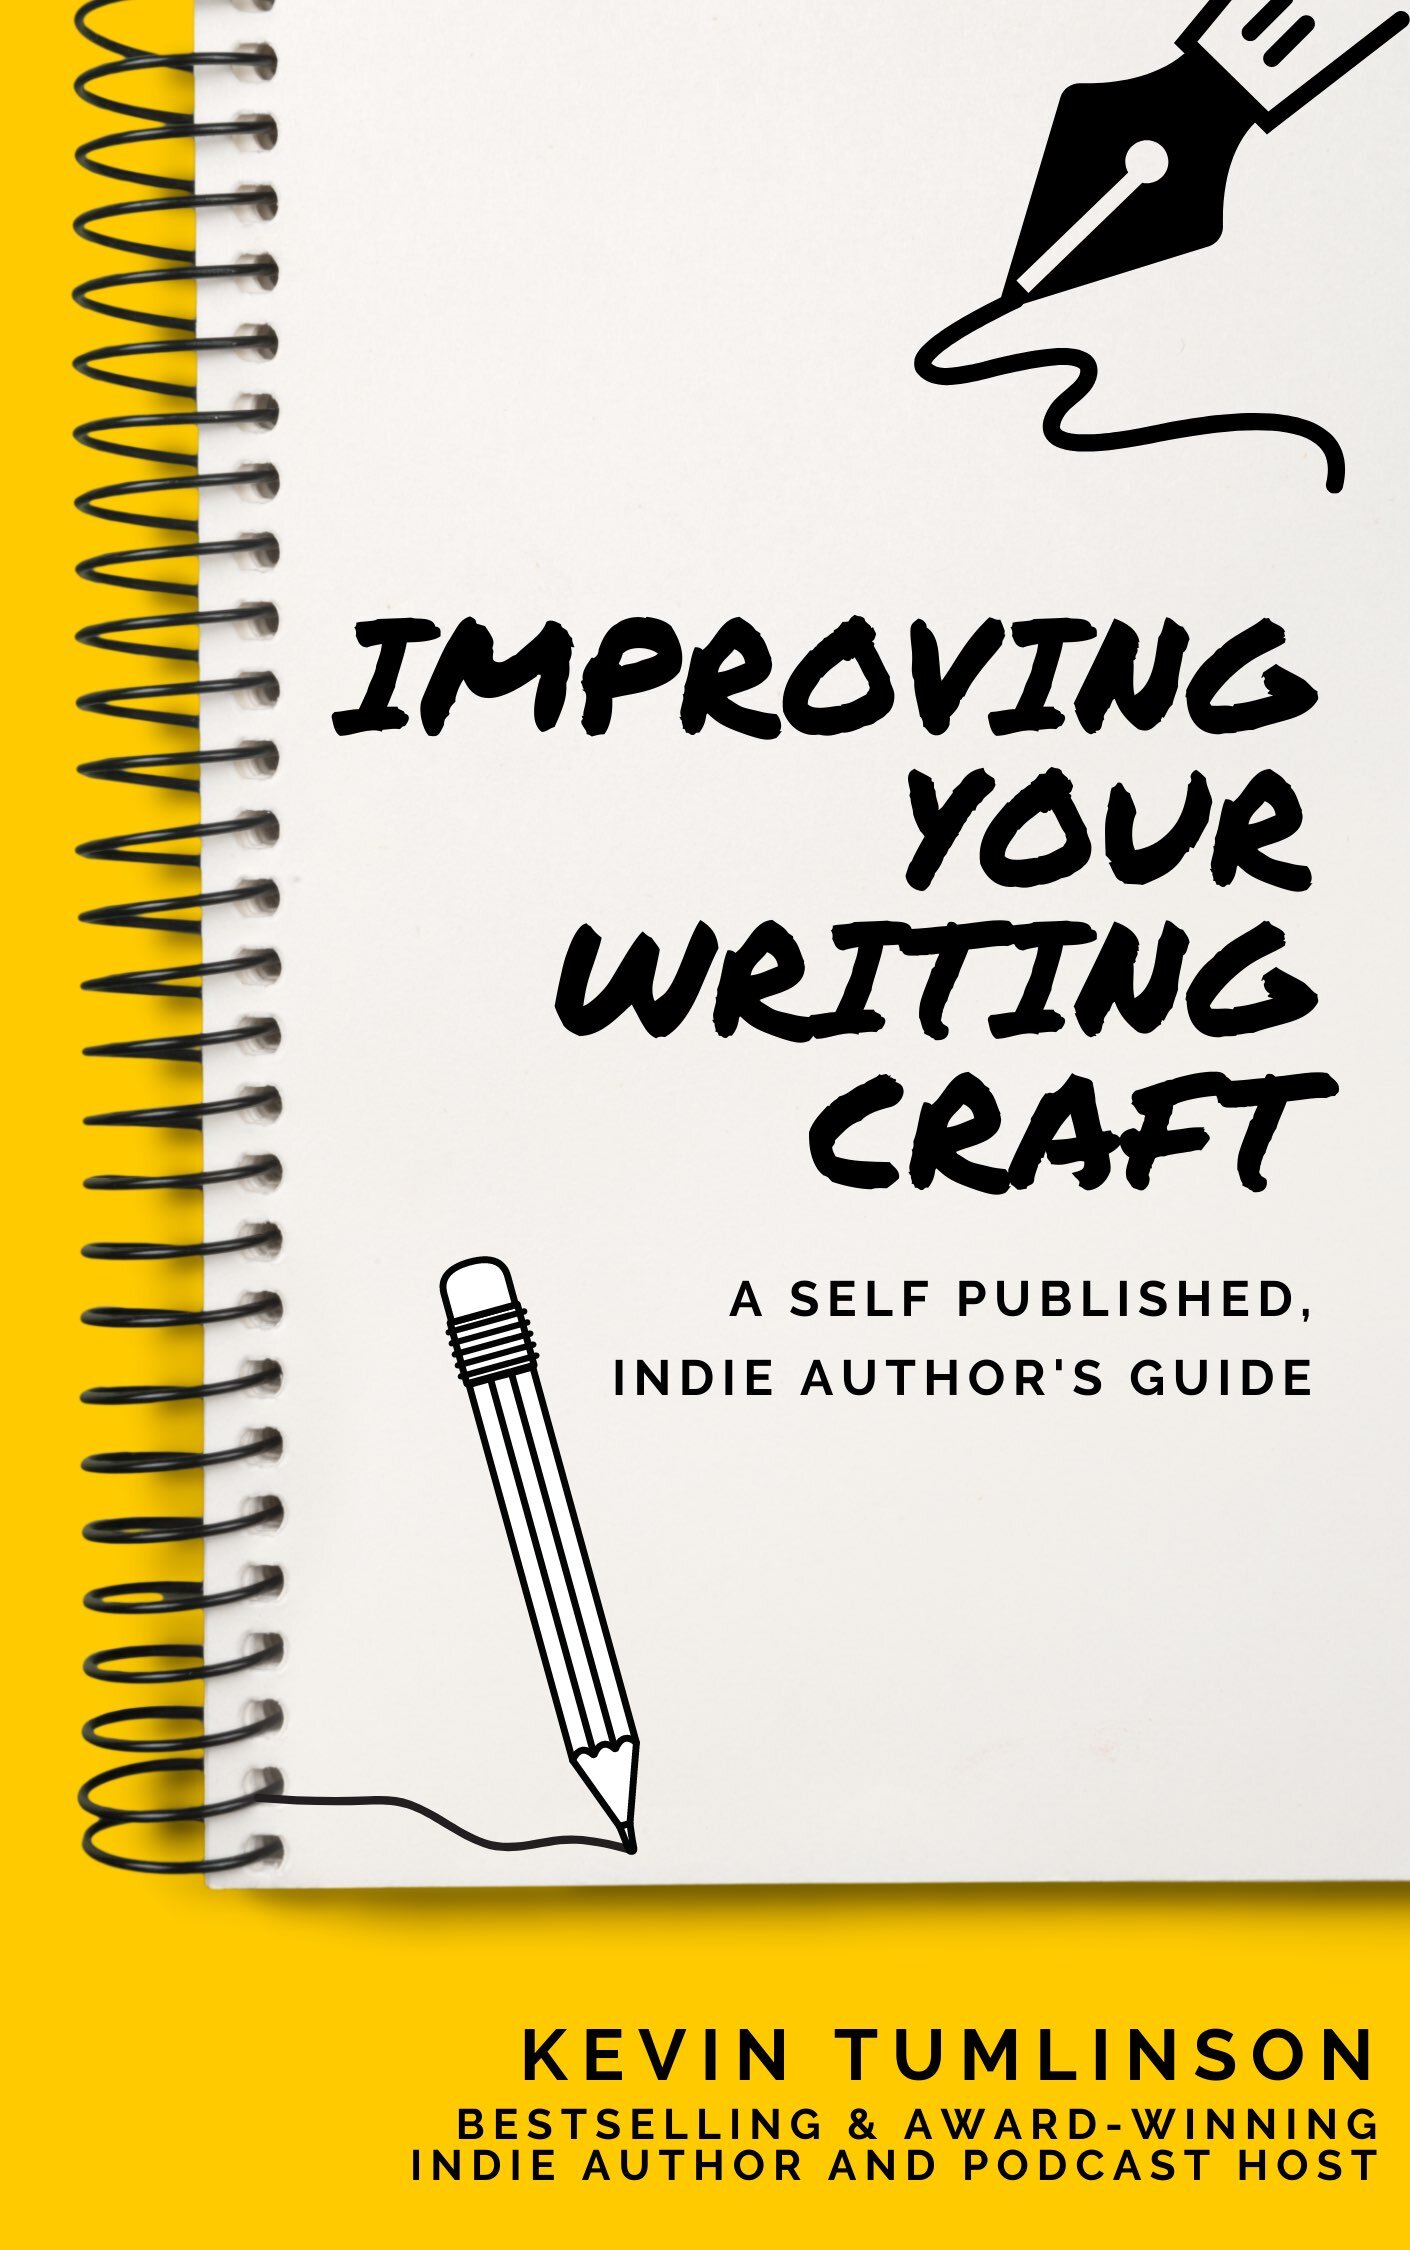 Improving Your Writing Craft: A Self Published, Indie Author's Guide